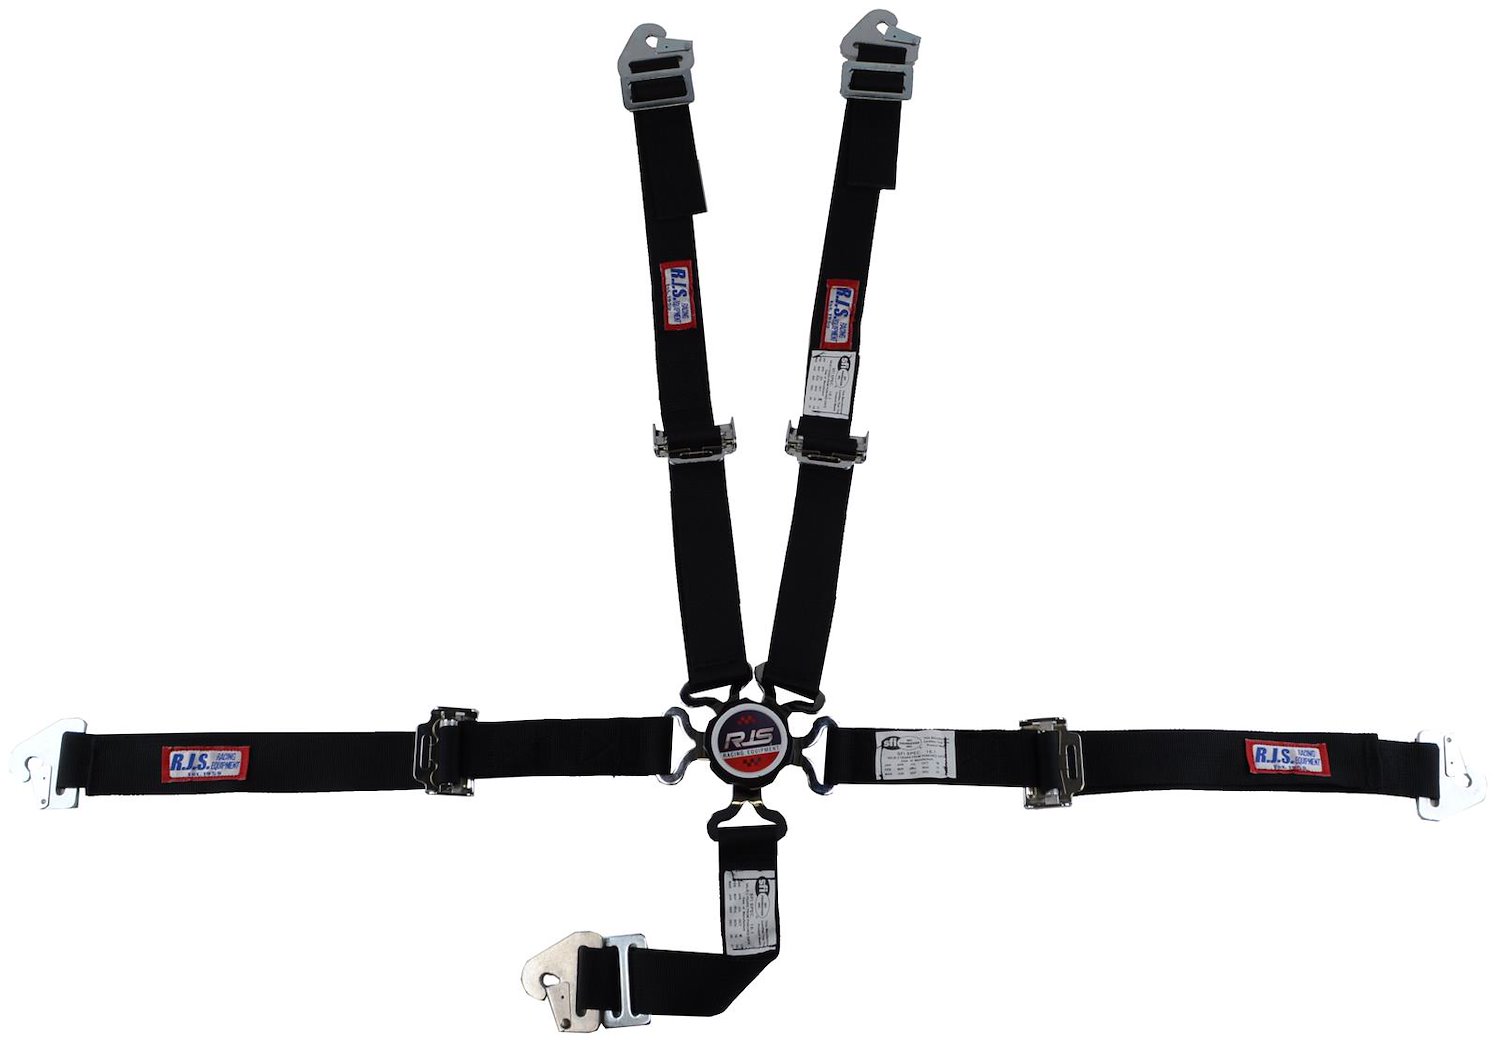 SFI 16.1 CAM-LOCK HARNESS 2 PULL UP Lap Belt 2 Shoulder Harness Individual FLOOR Mount 2 DOUBLESub ALL WRAP ENDS BLUE